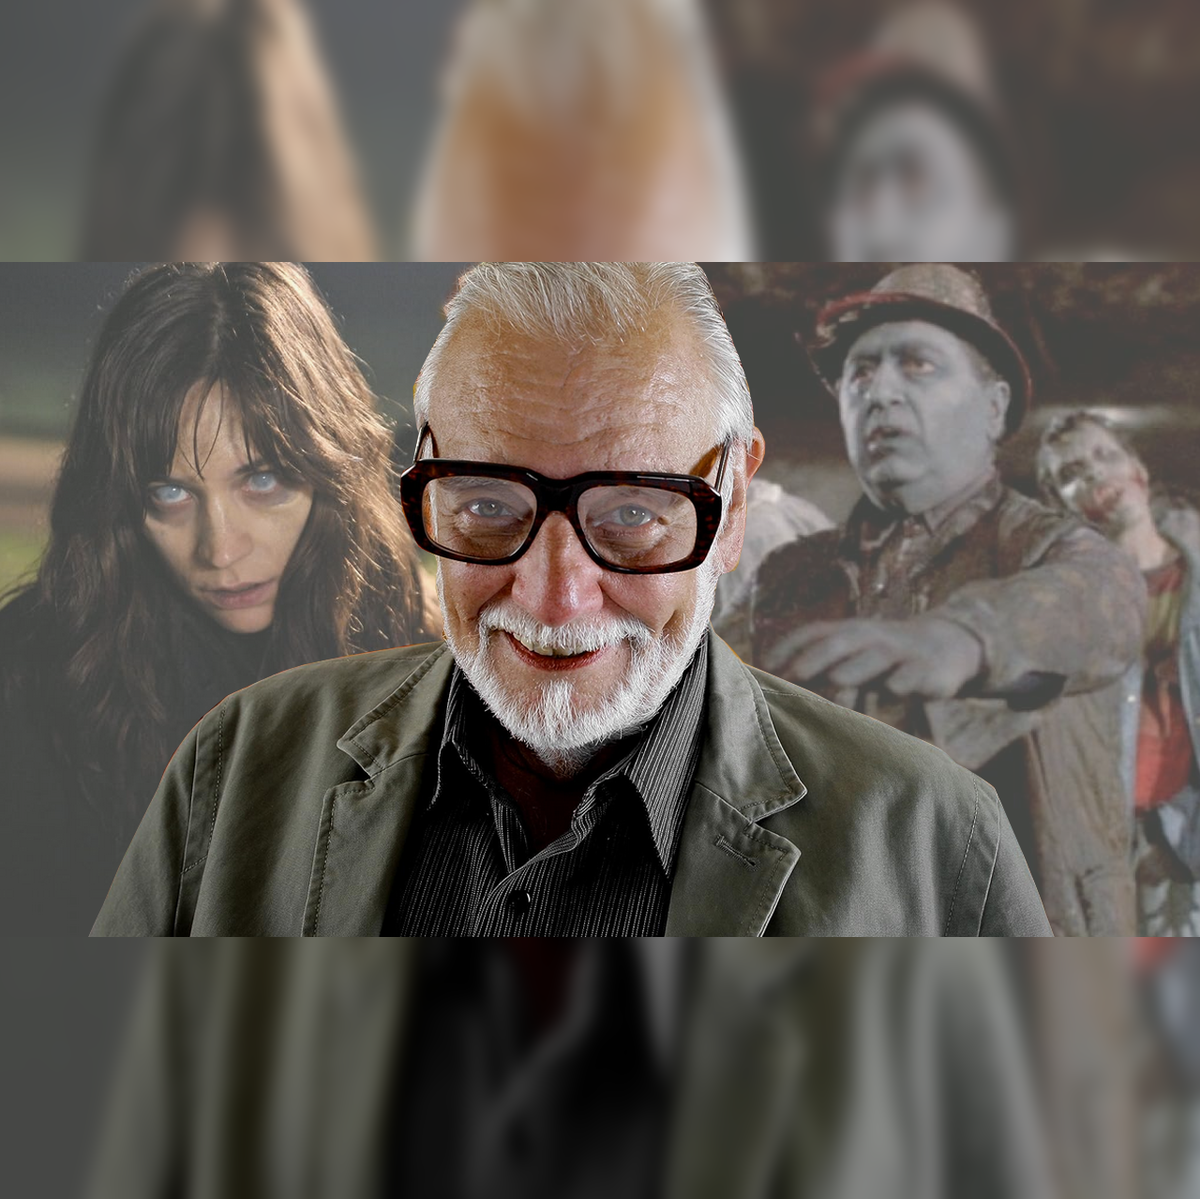 The Best Zombie Movies NOT from George Romero